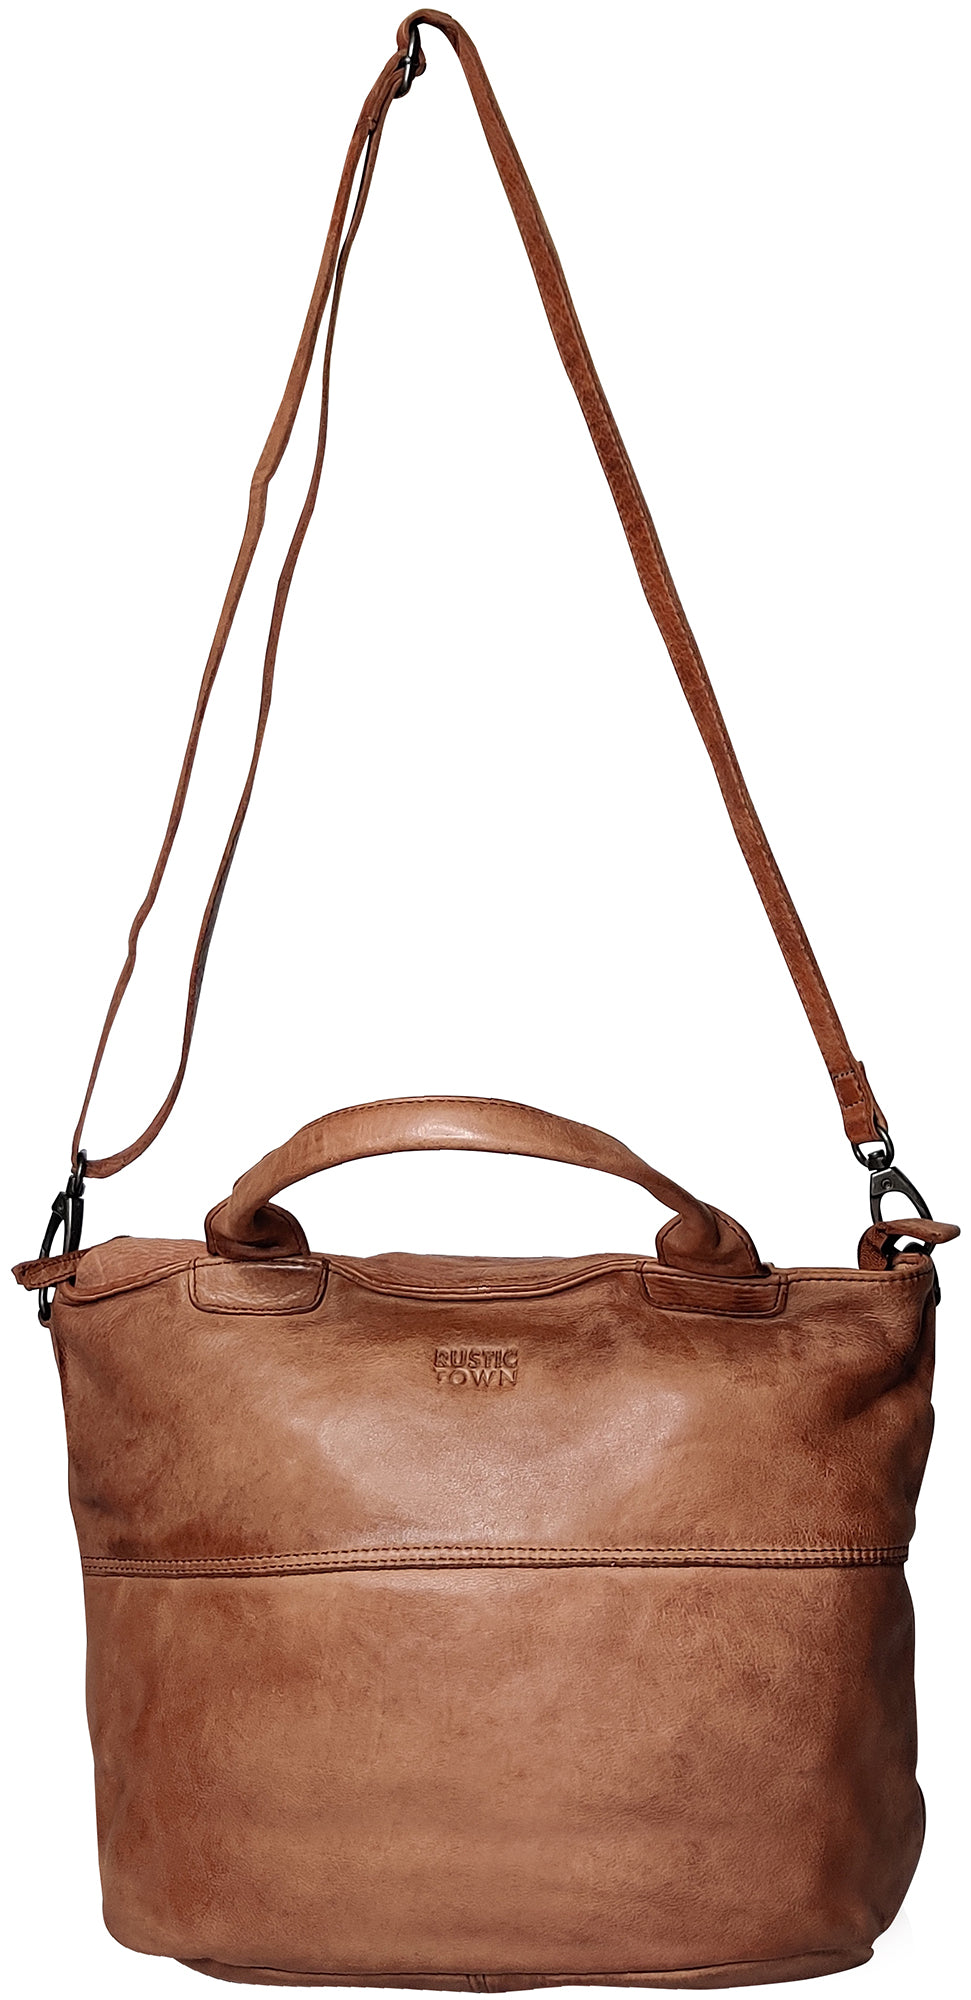 Leather Tote Bag for Women, Cognac